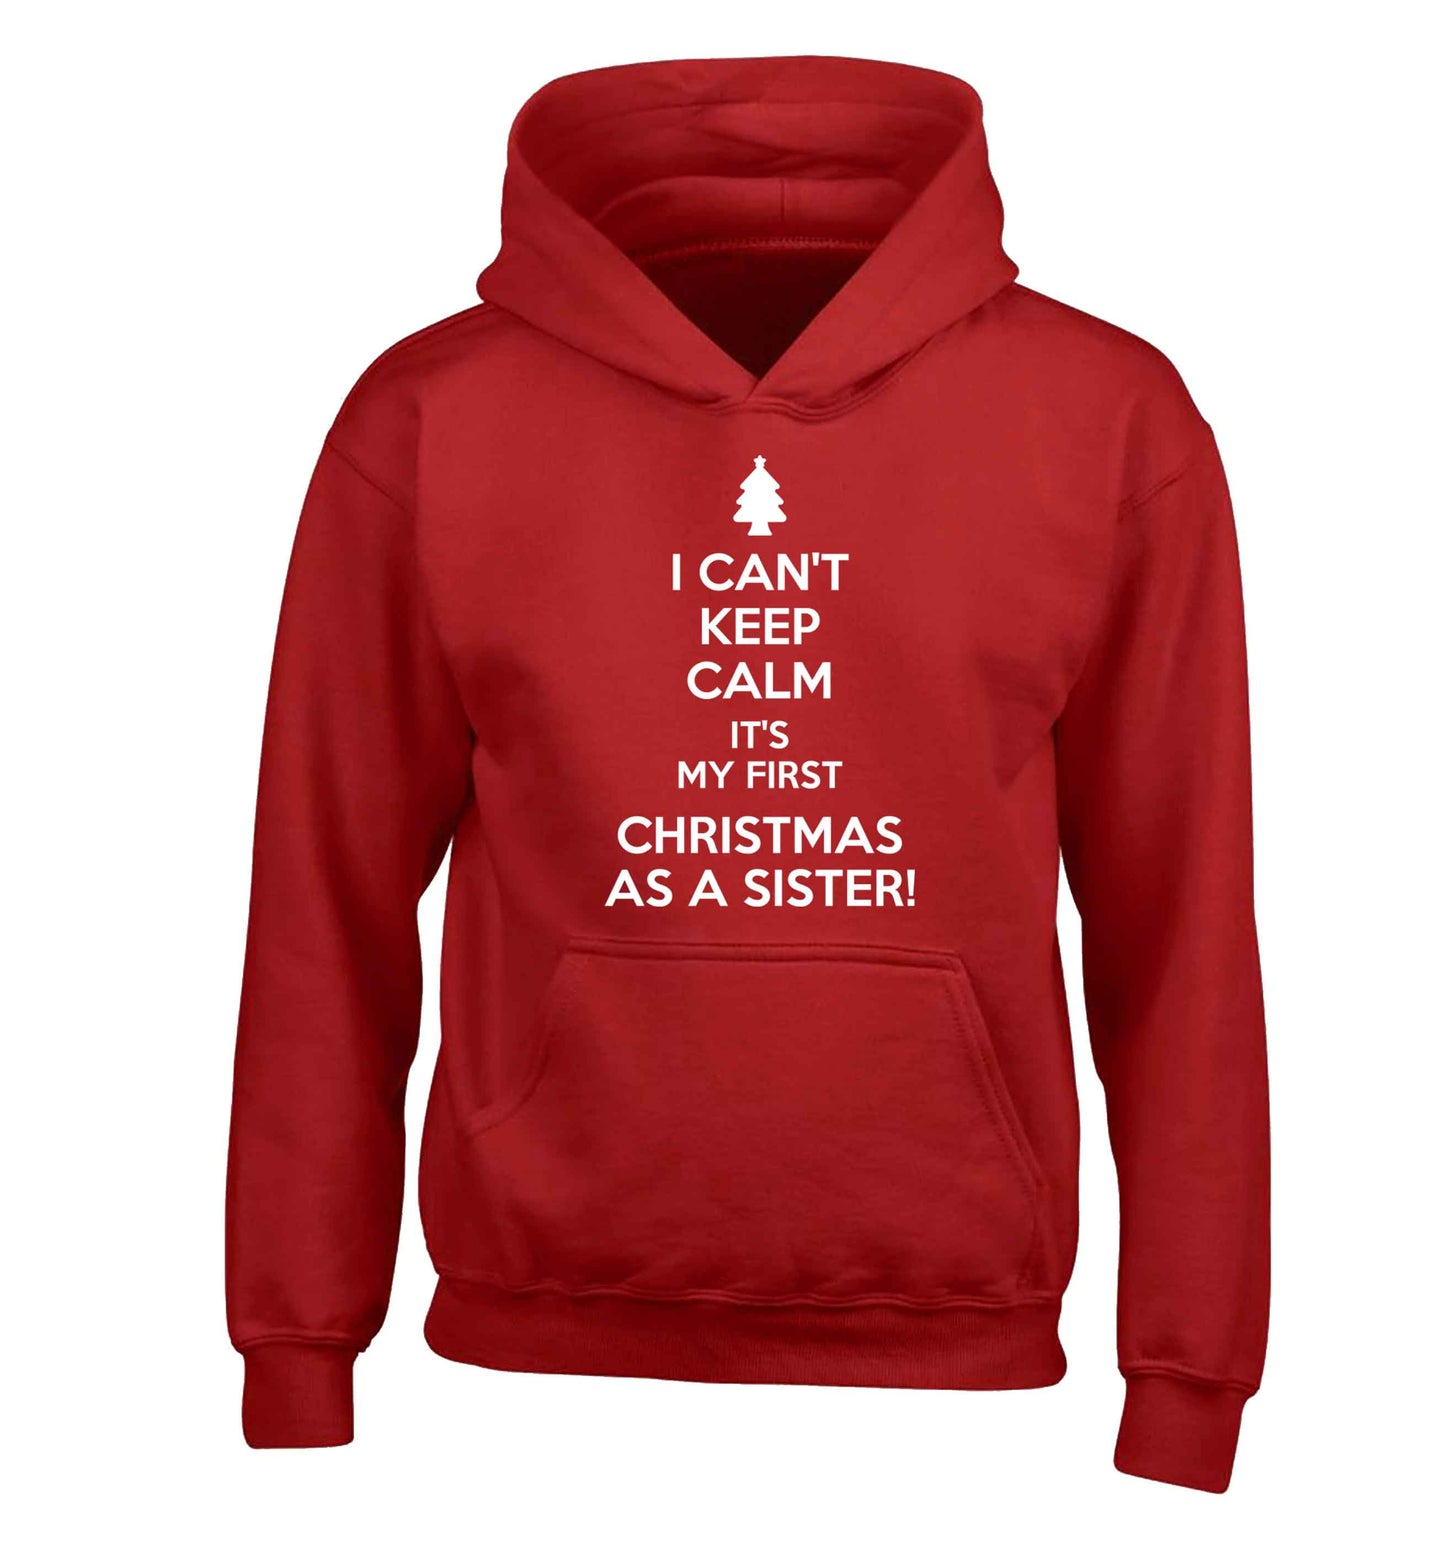 I can't keep calm it's my first Christmas as a sister! children's red hoodie 12-13 Years